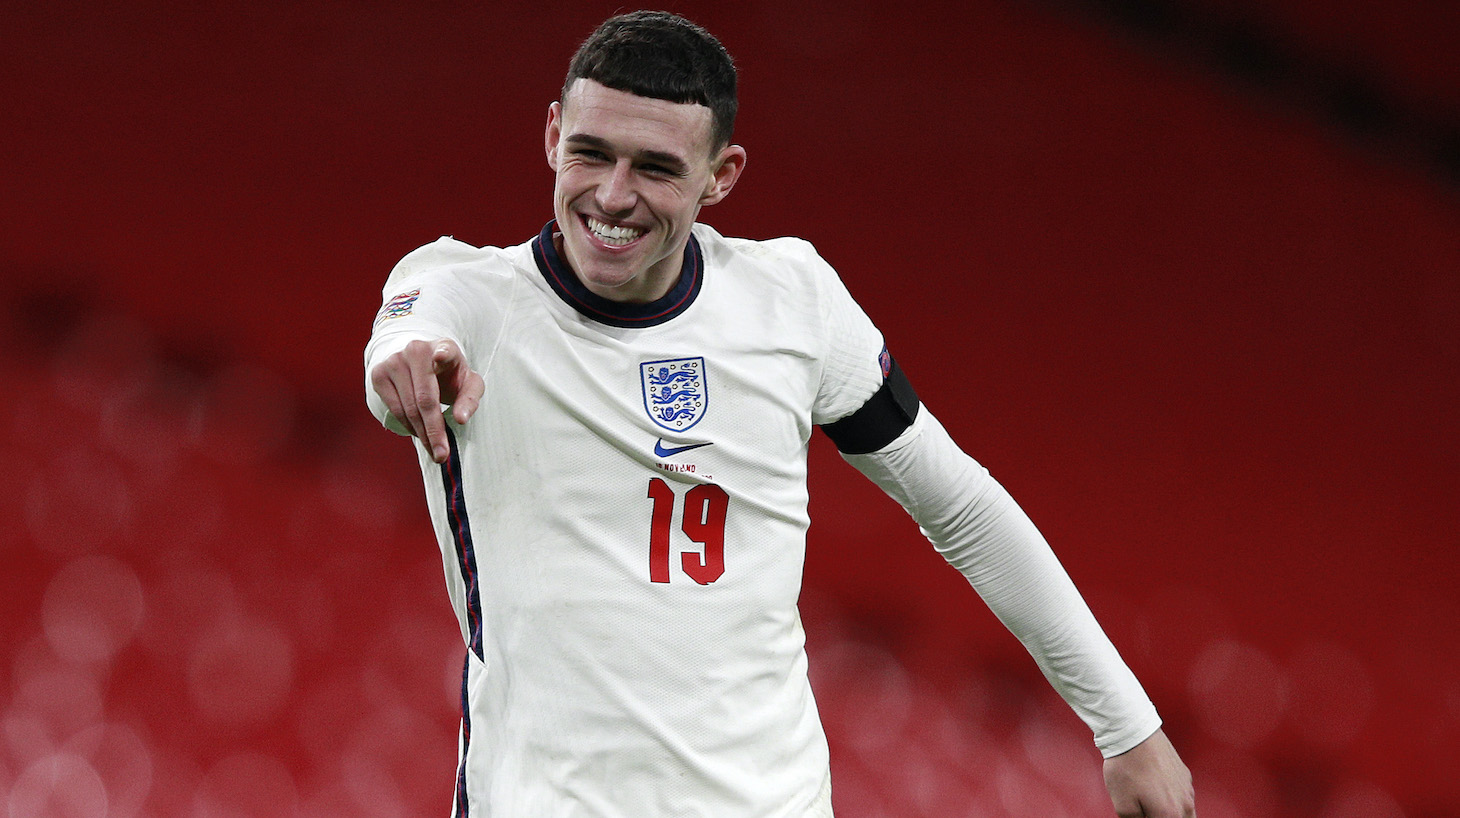 Phil Foden of England celebrates after scoring their team's third goal during the UEFA Nations League group stage match between England and Iceland at Wembley Stadium on November 18, 2020 in London, England. Football Stadiums around Europe remain empty due to the Coronavirus Pandemic as Government social distancing laws prohibit fans inside venues resulting in fixtures being played behind closed doors.